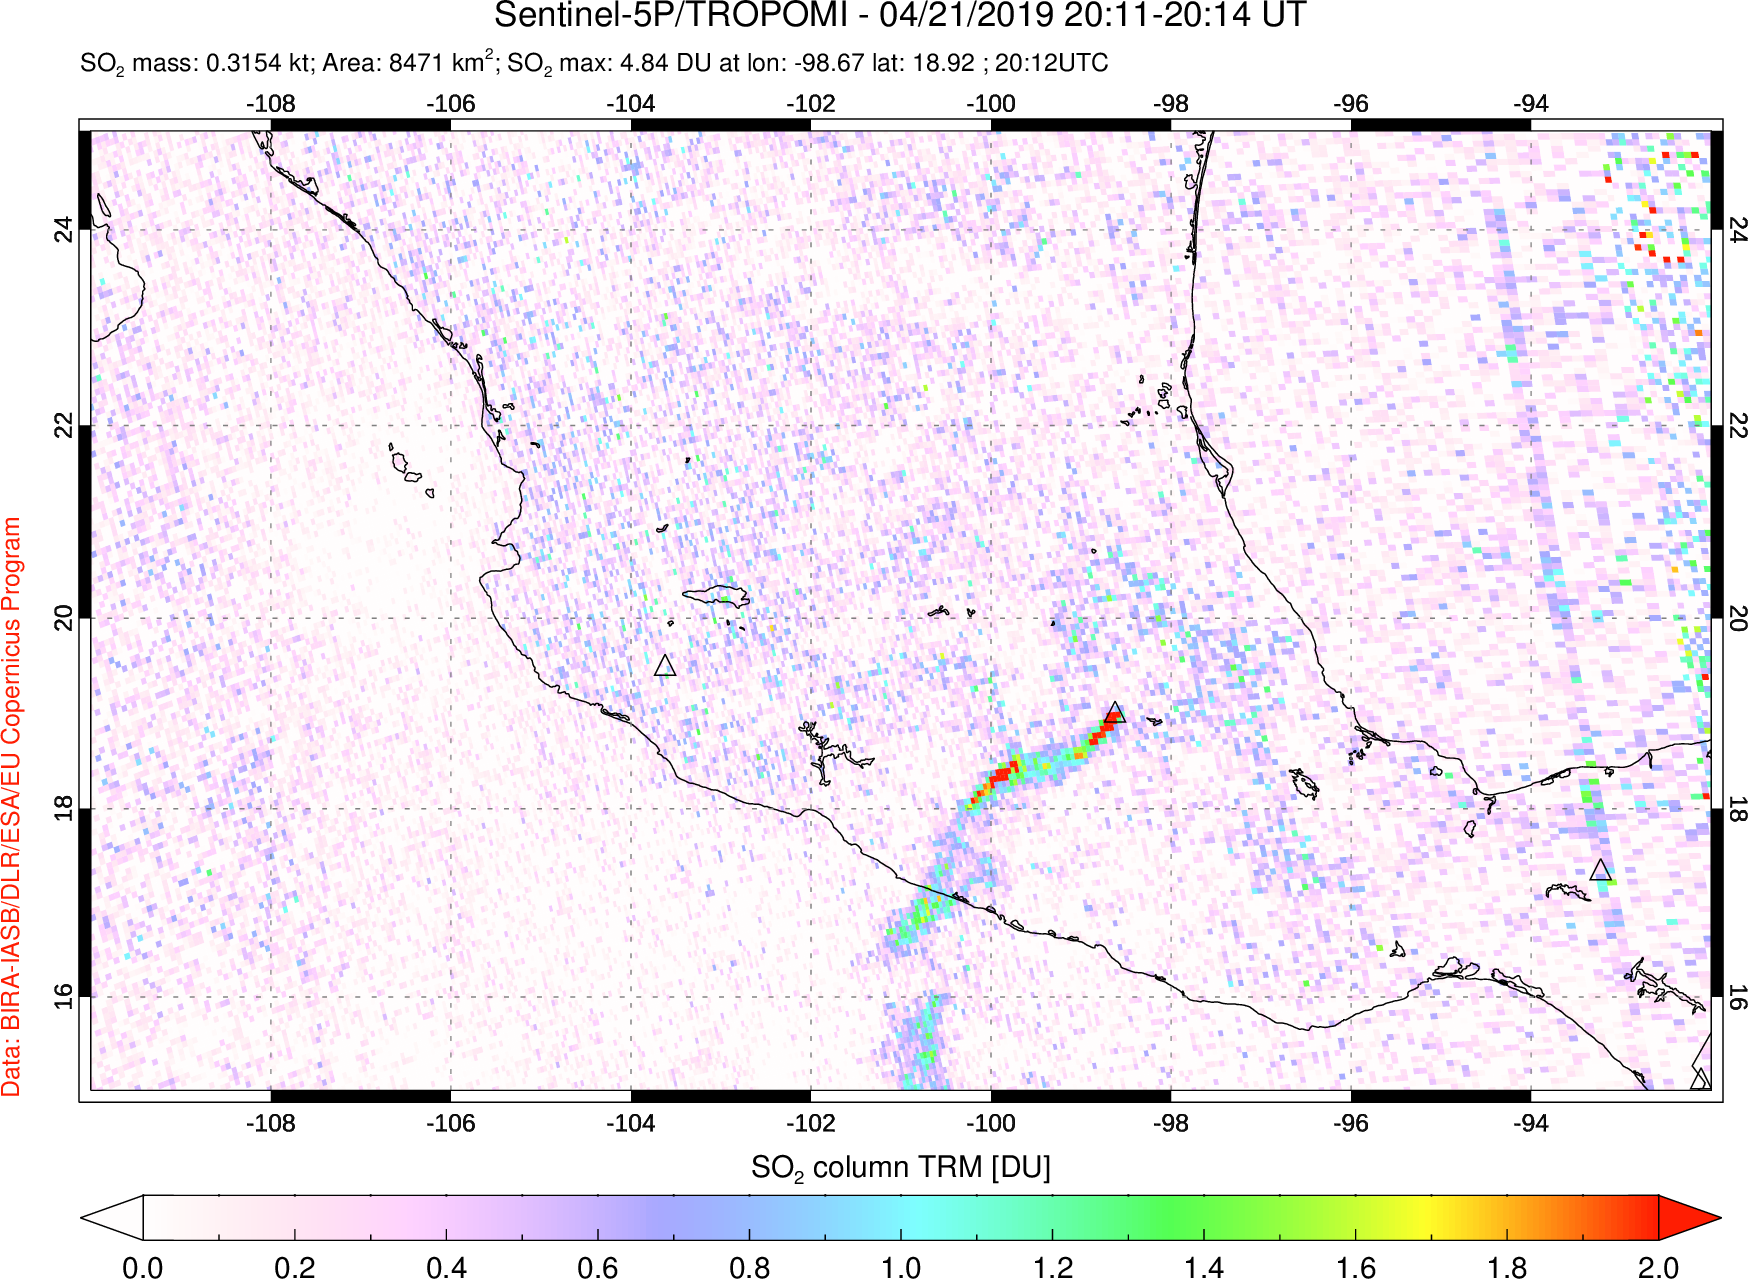 A sulfur dioxide image over Mexico on Apr 21, 2019.